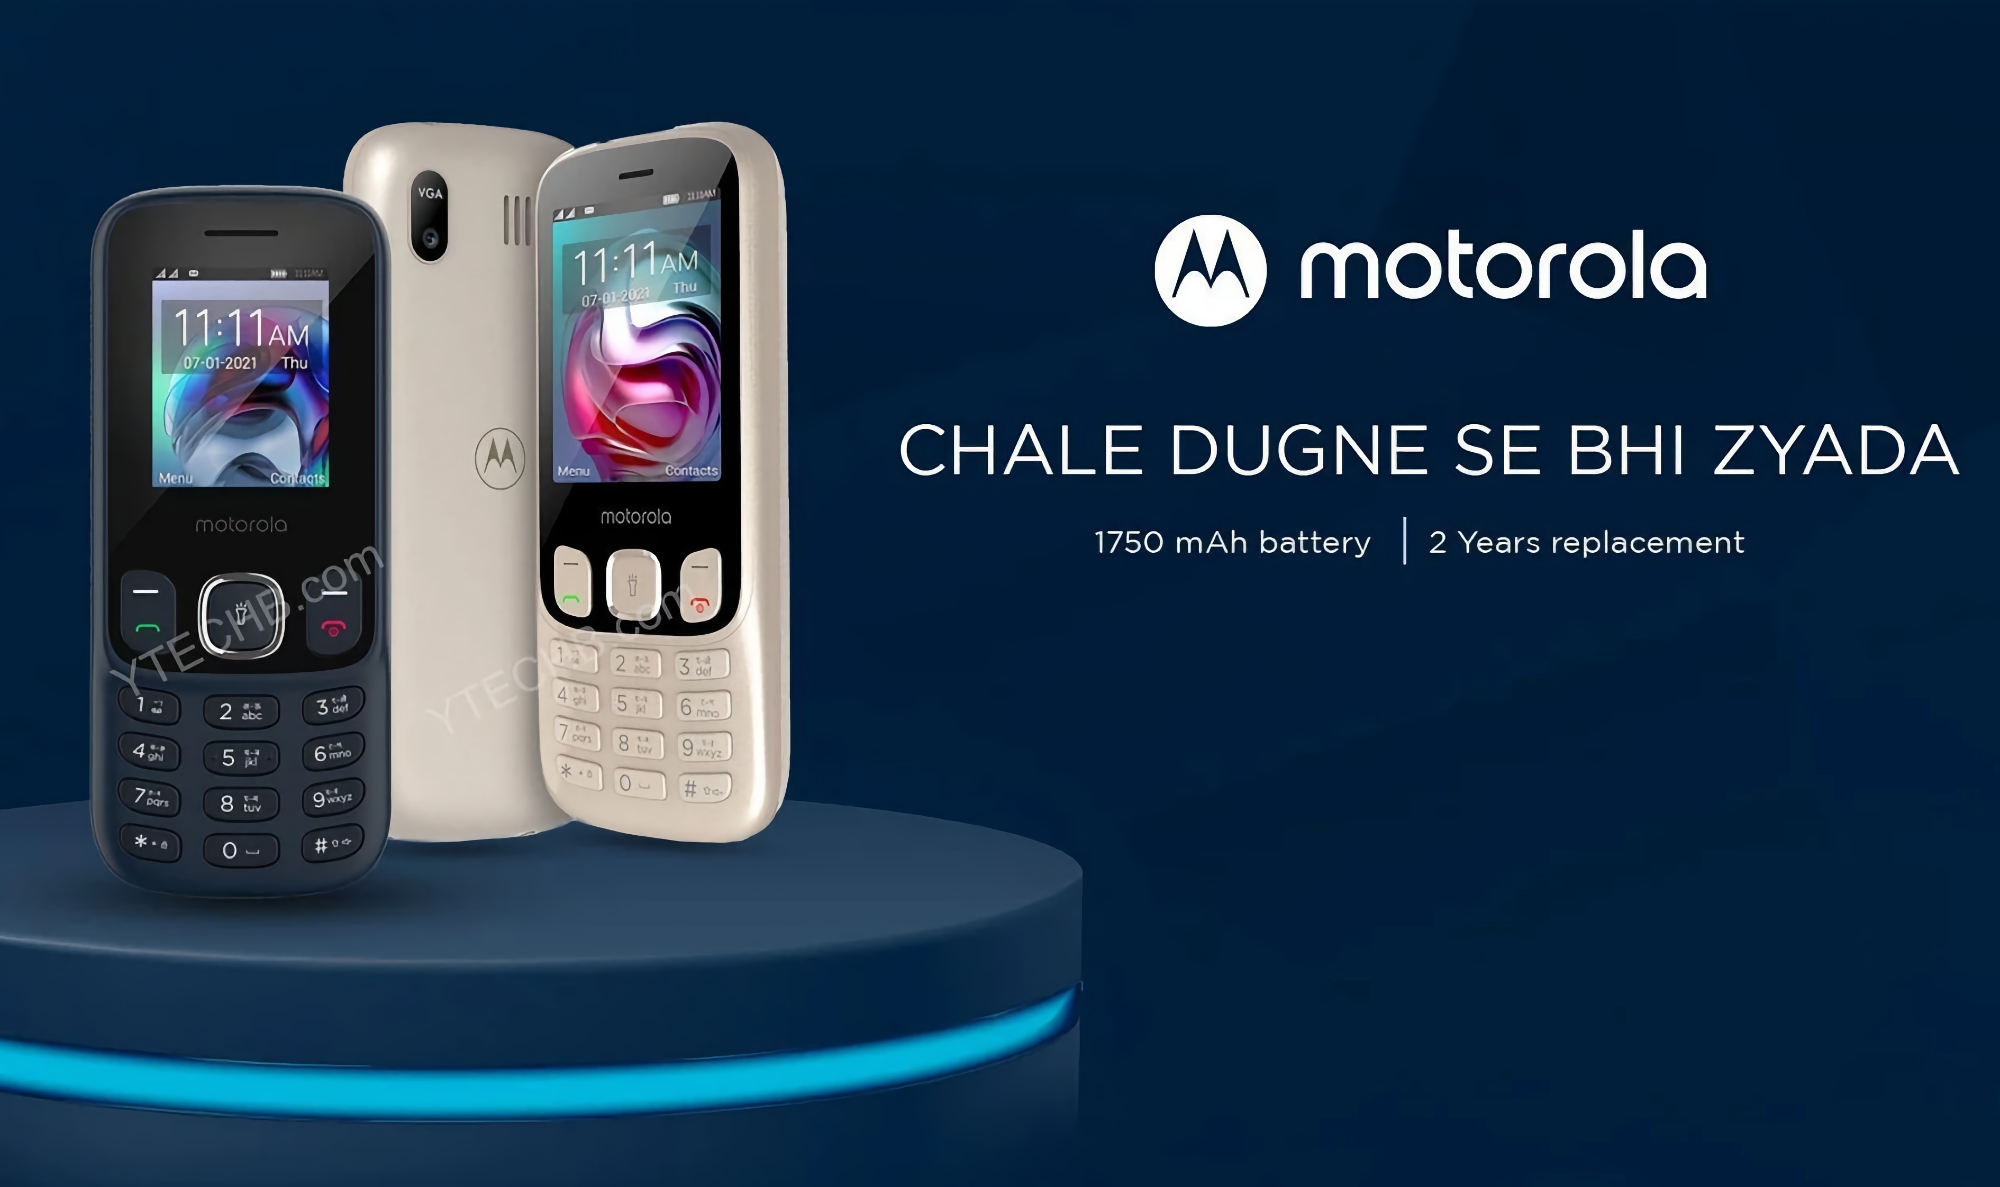 To compete with Nokia: Motorola will return to the mobile phone market with Moto A10, Moto A50 and Moto A70